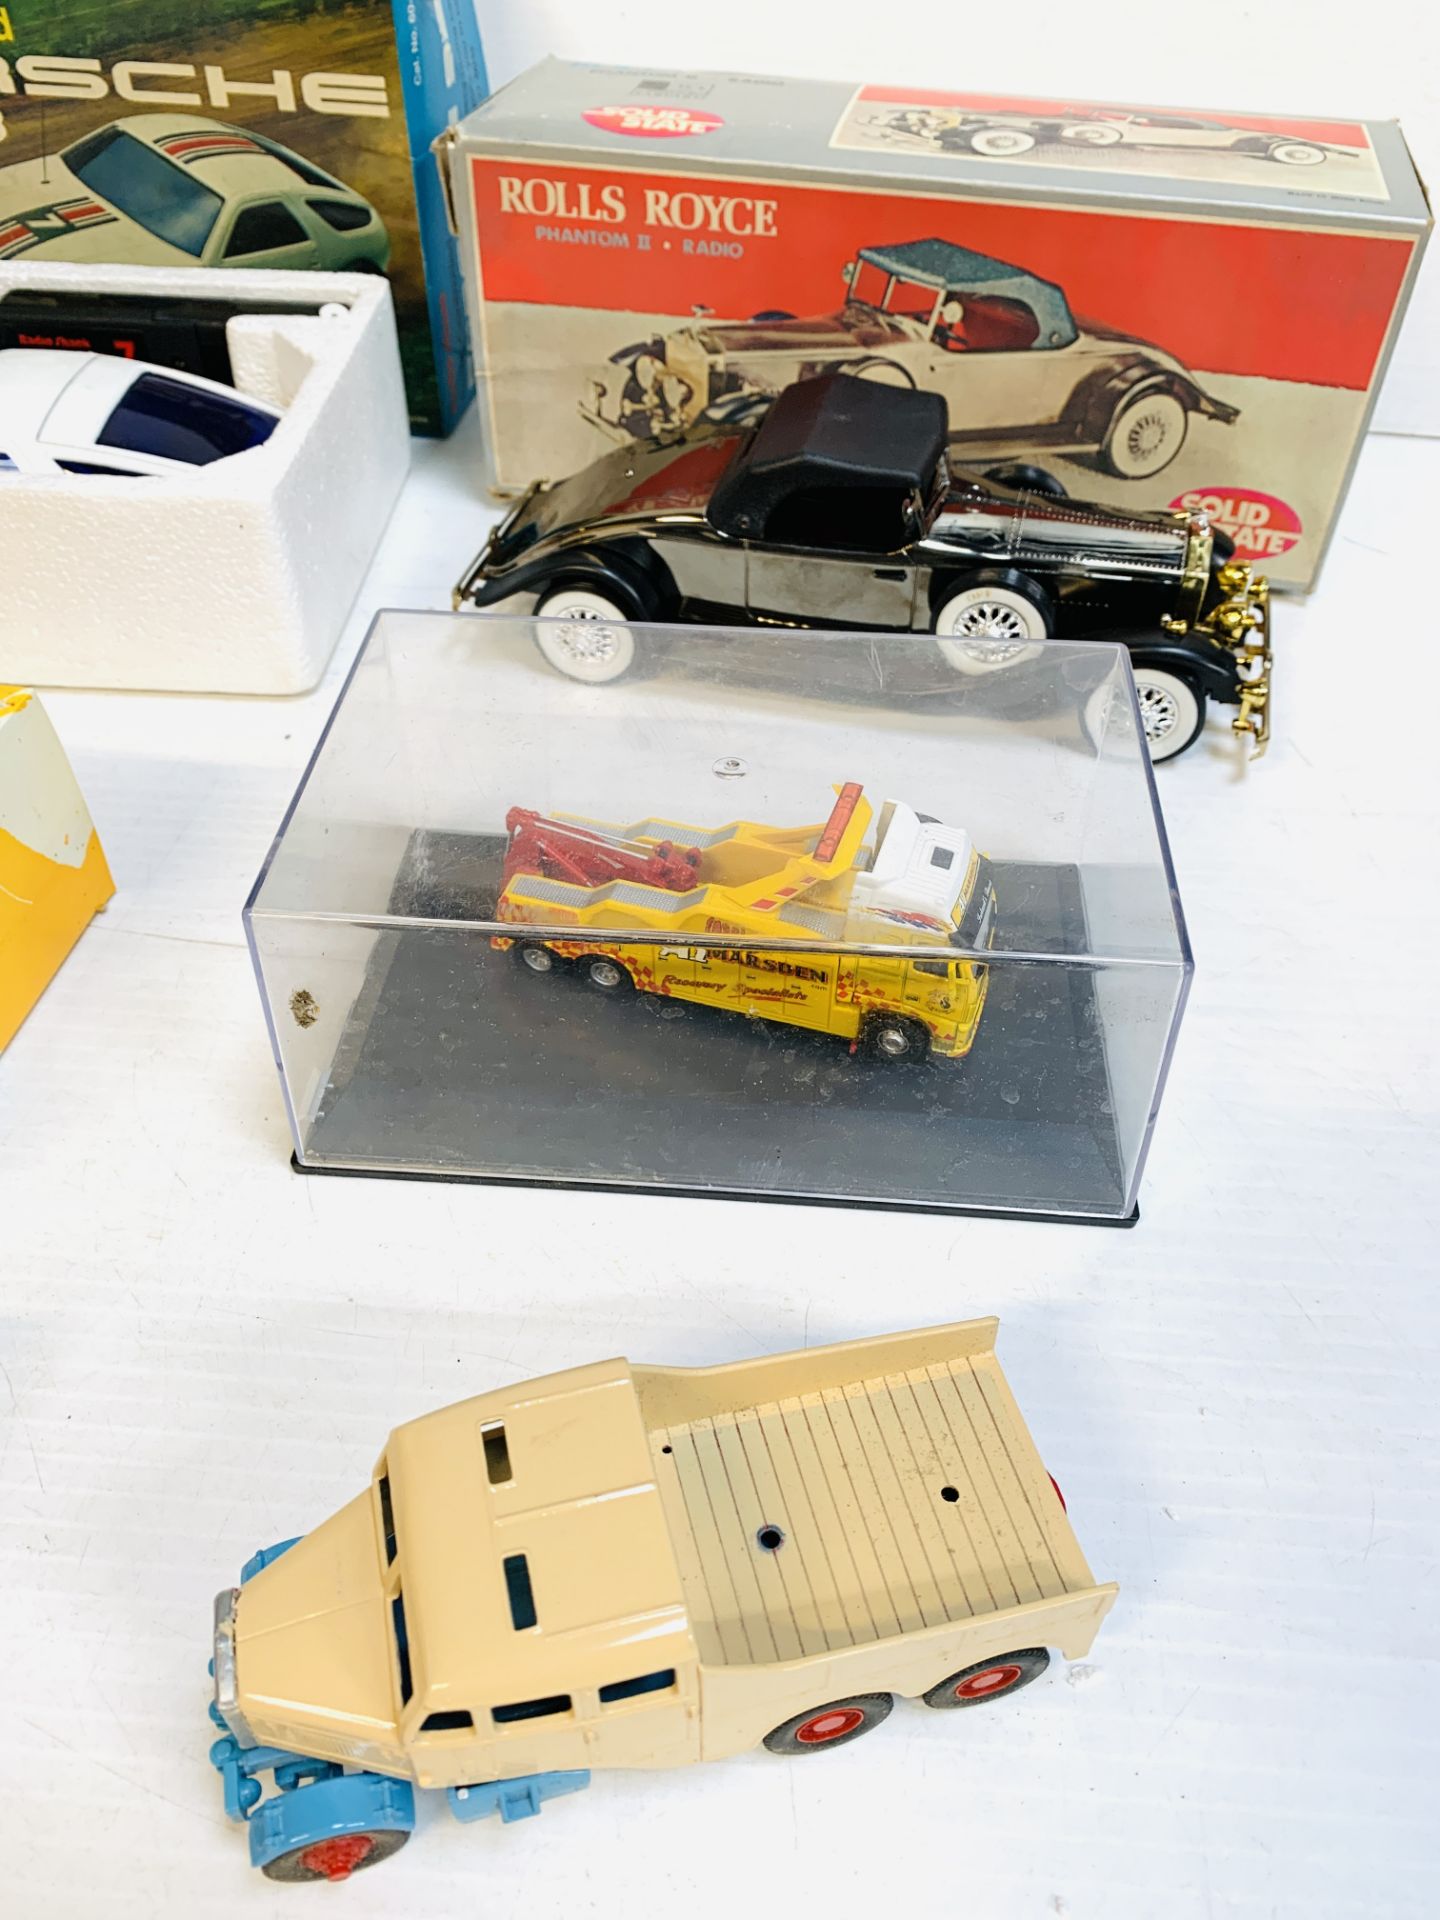 A Rolls Royce Phantom II transistor radio; a Radio-controlled model Porsche 928 with others - Image 2 of 6